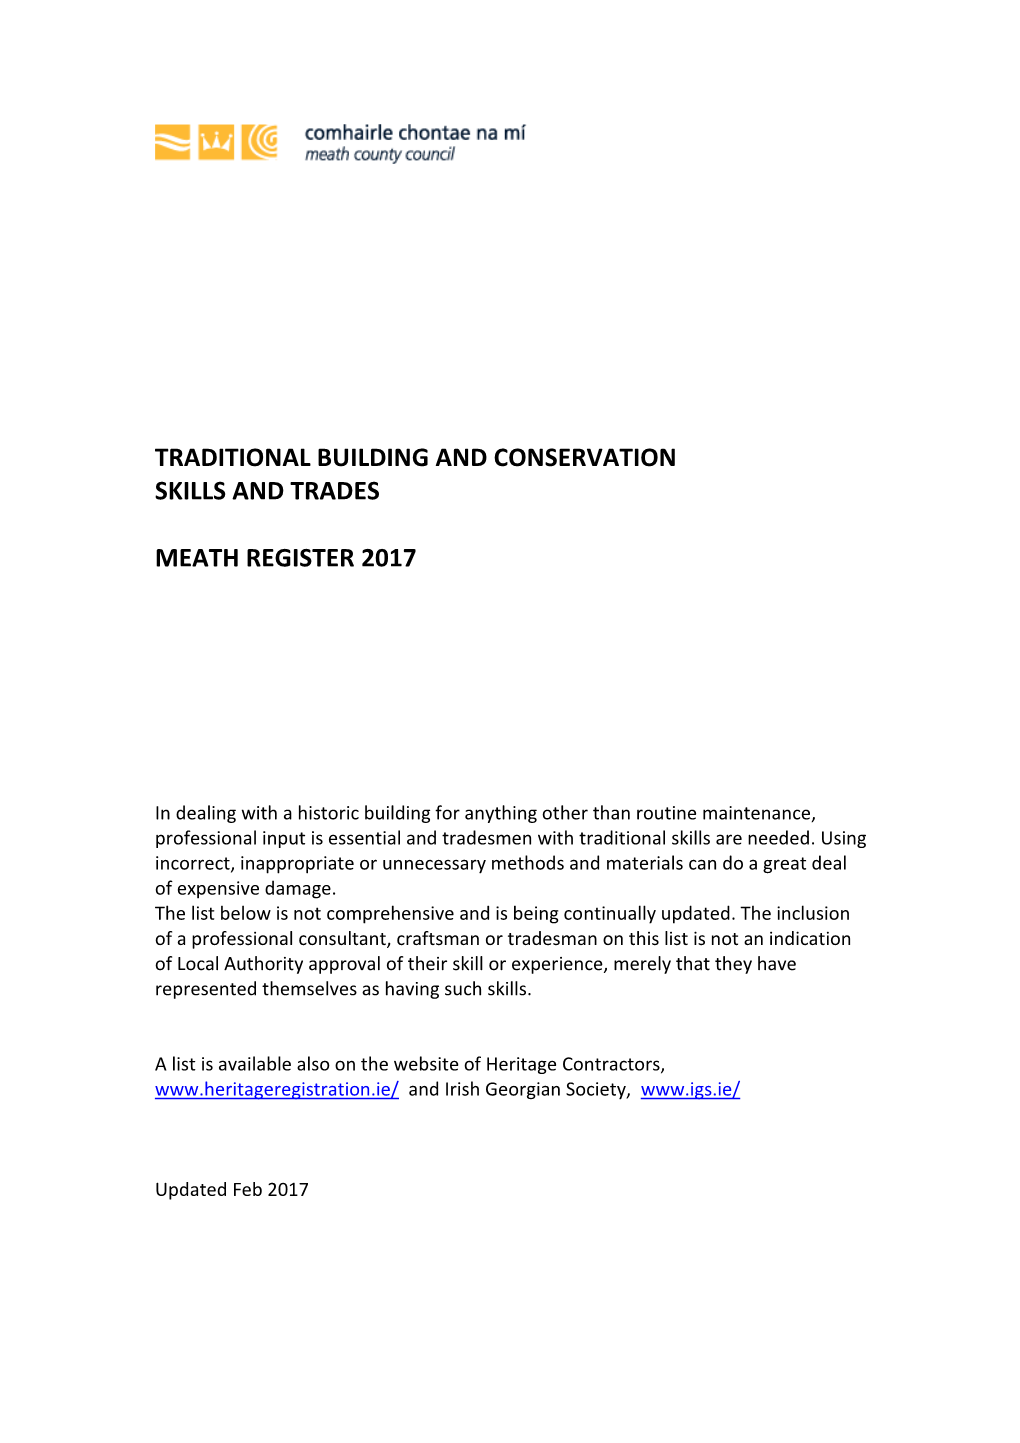 Traditional Building and Conservation Skills and Trades Meath Register 2017